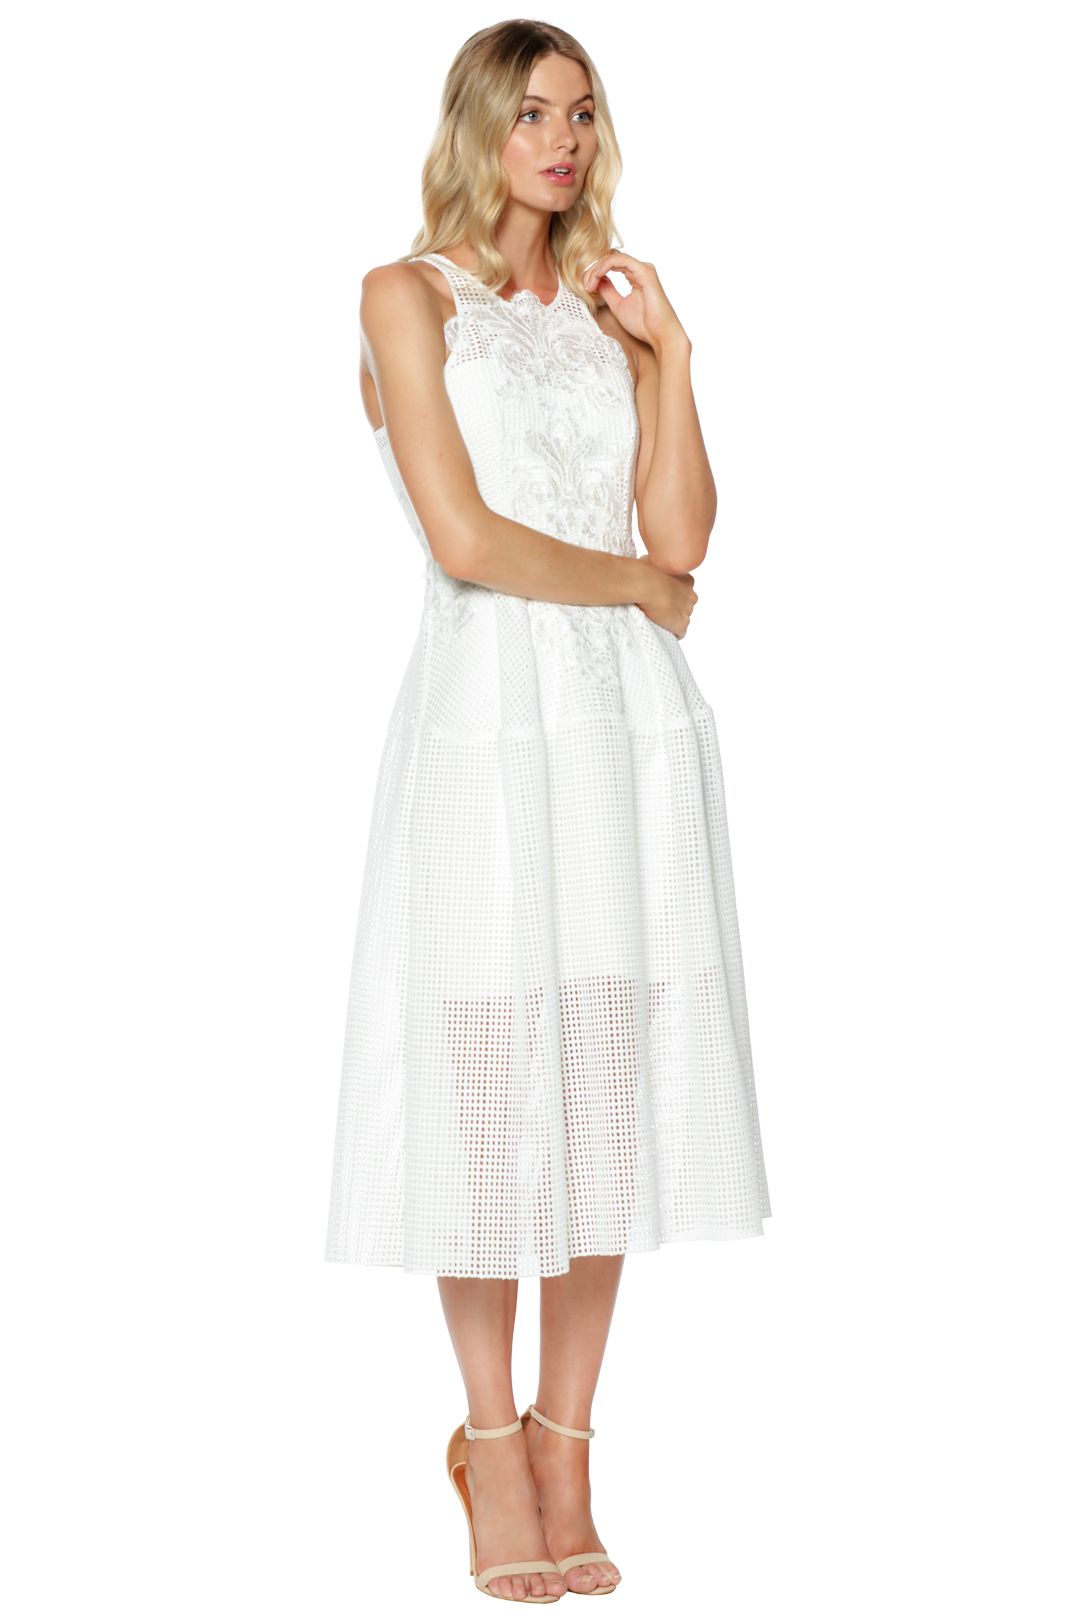 Thurley - Bianca Embroidered Dress - White - Side